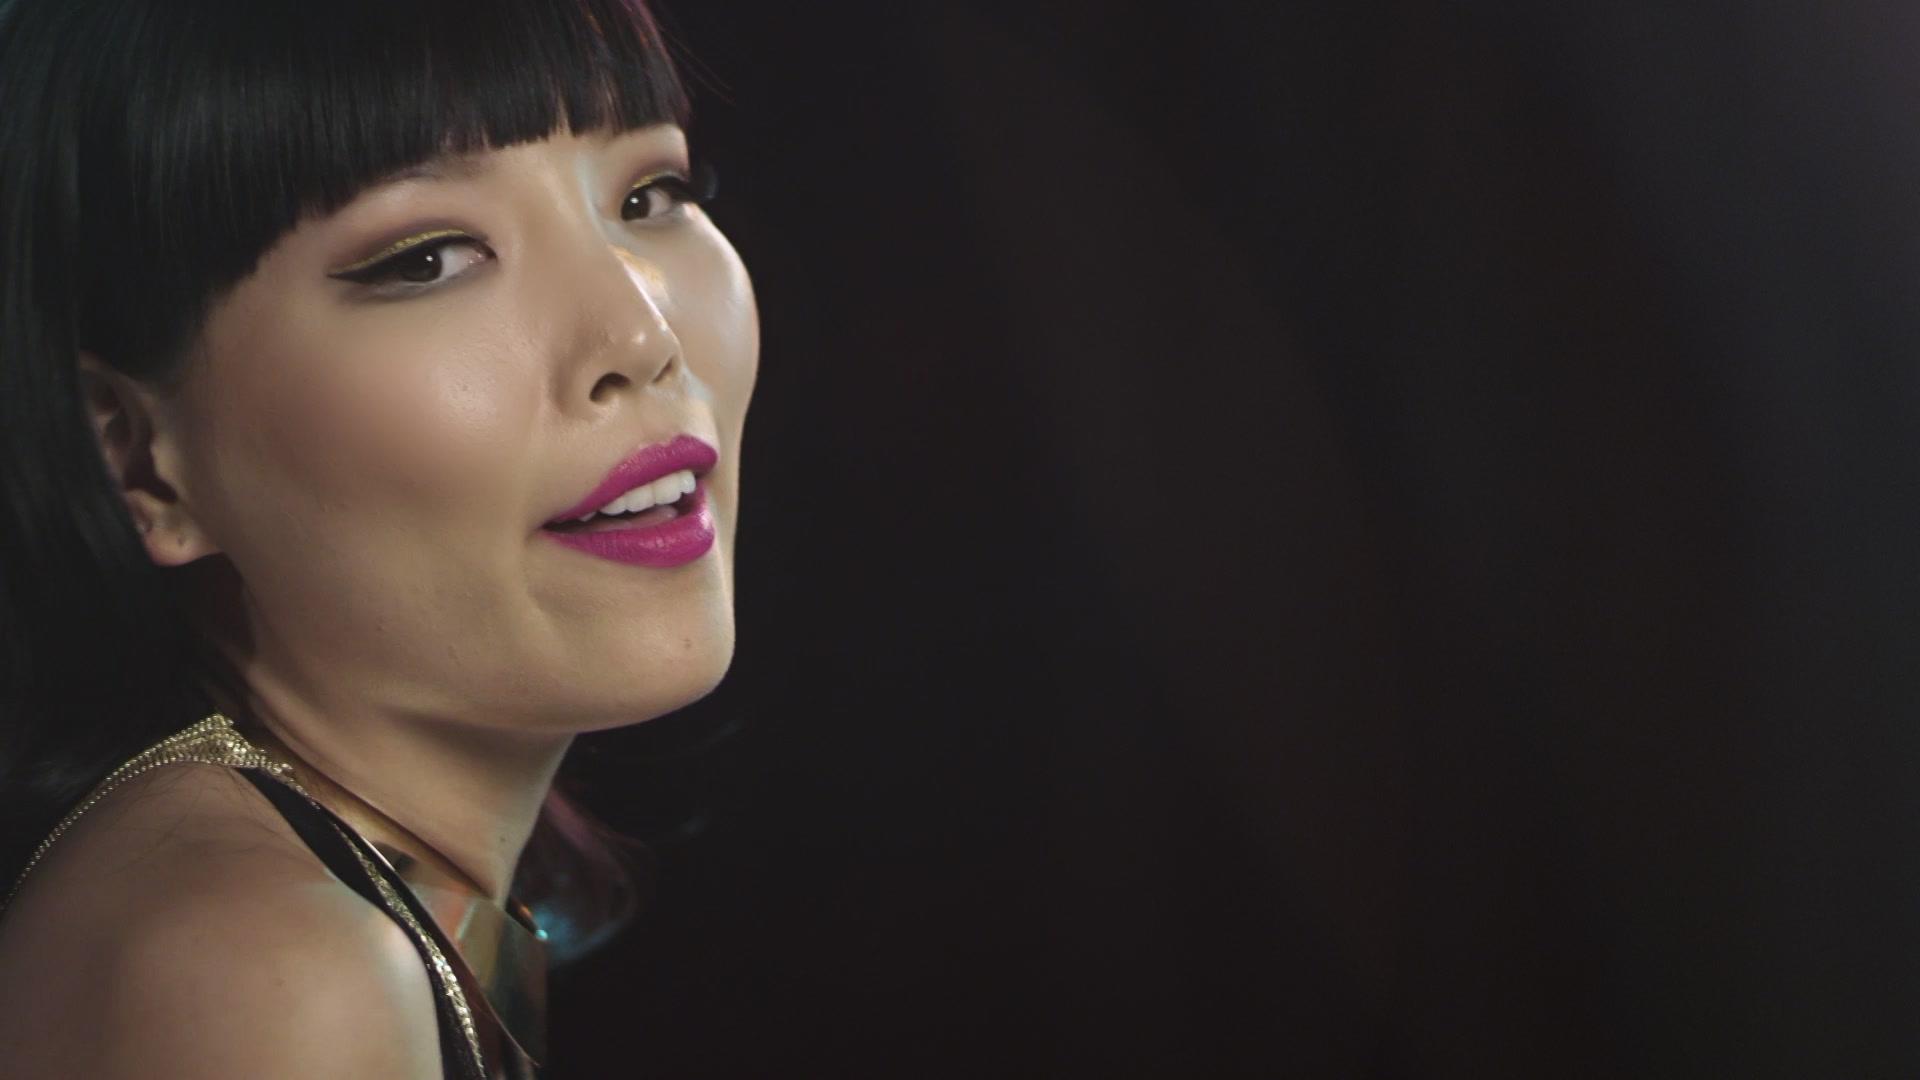 Dami Im - There's a Kind of Hush (All Over the World)